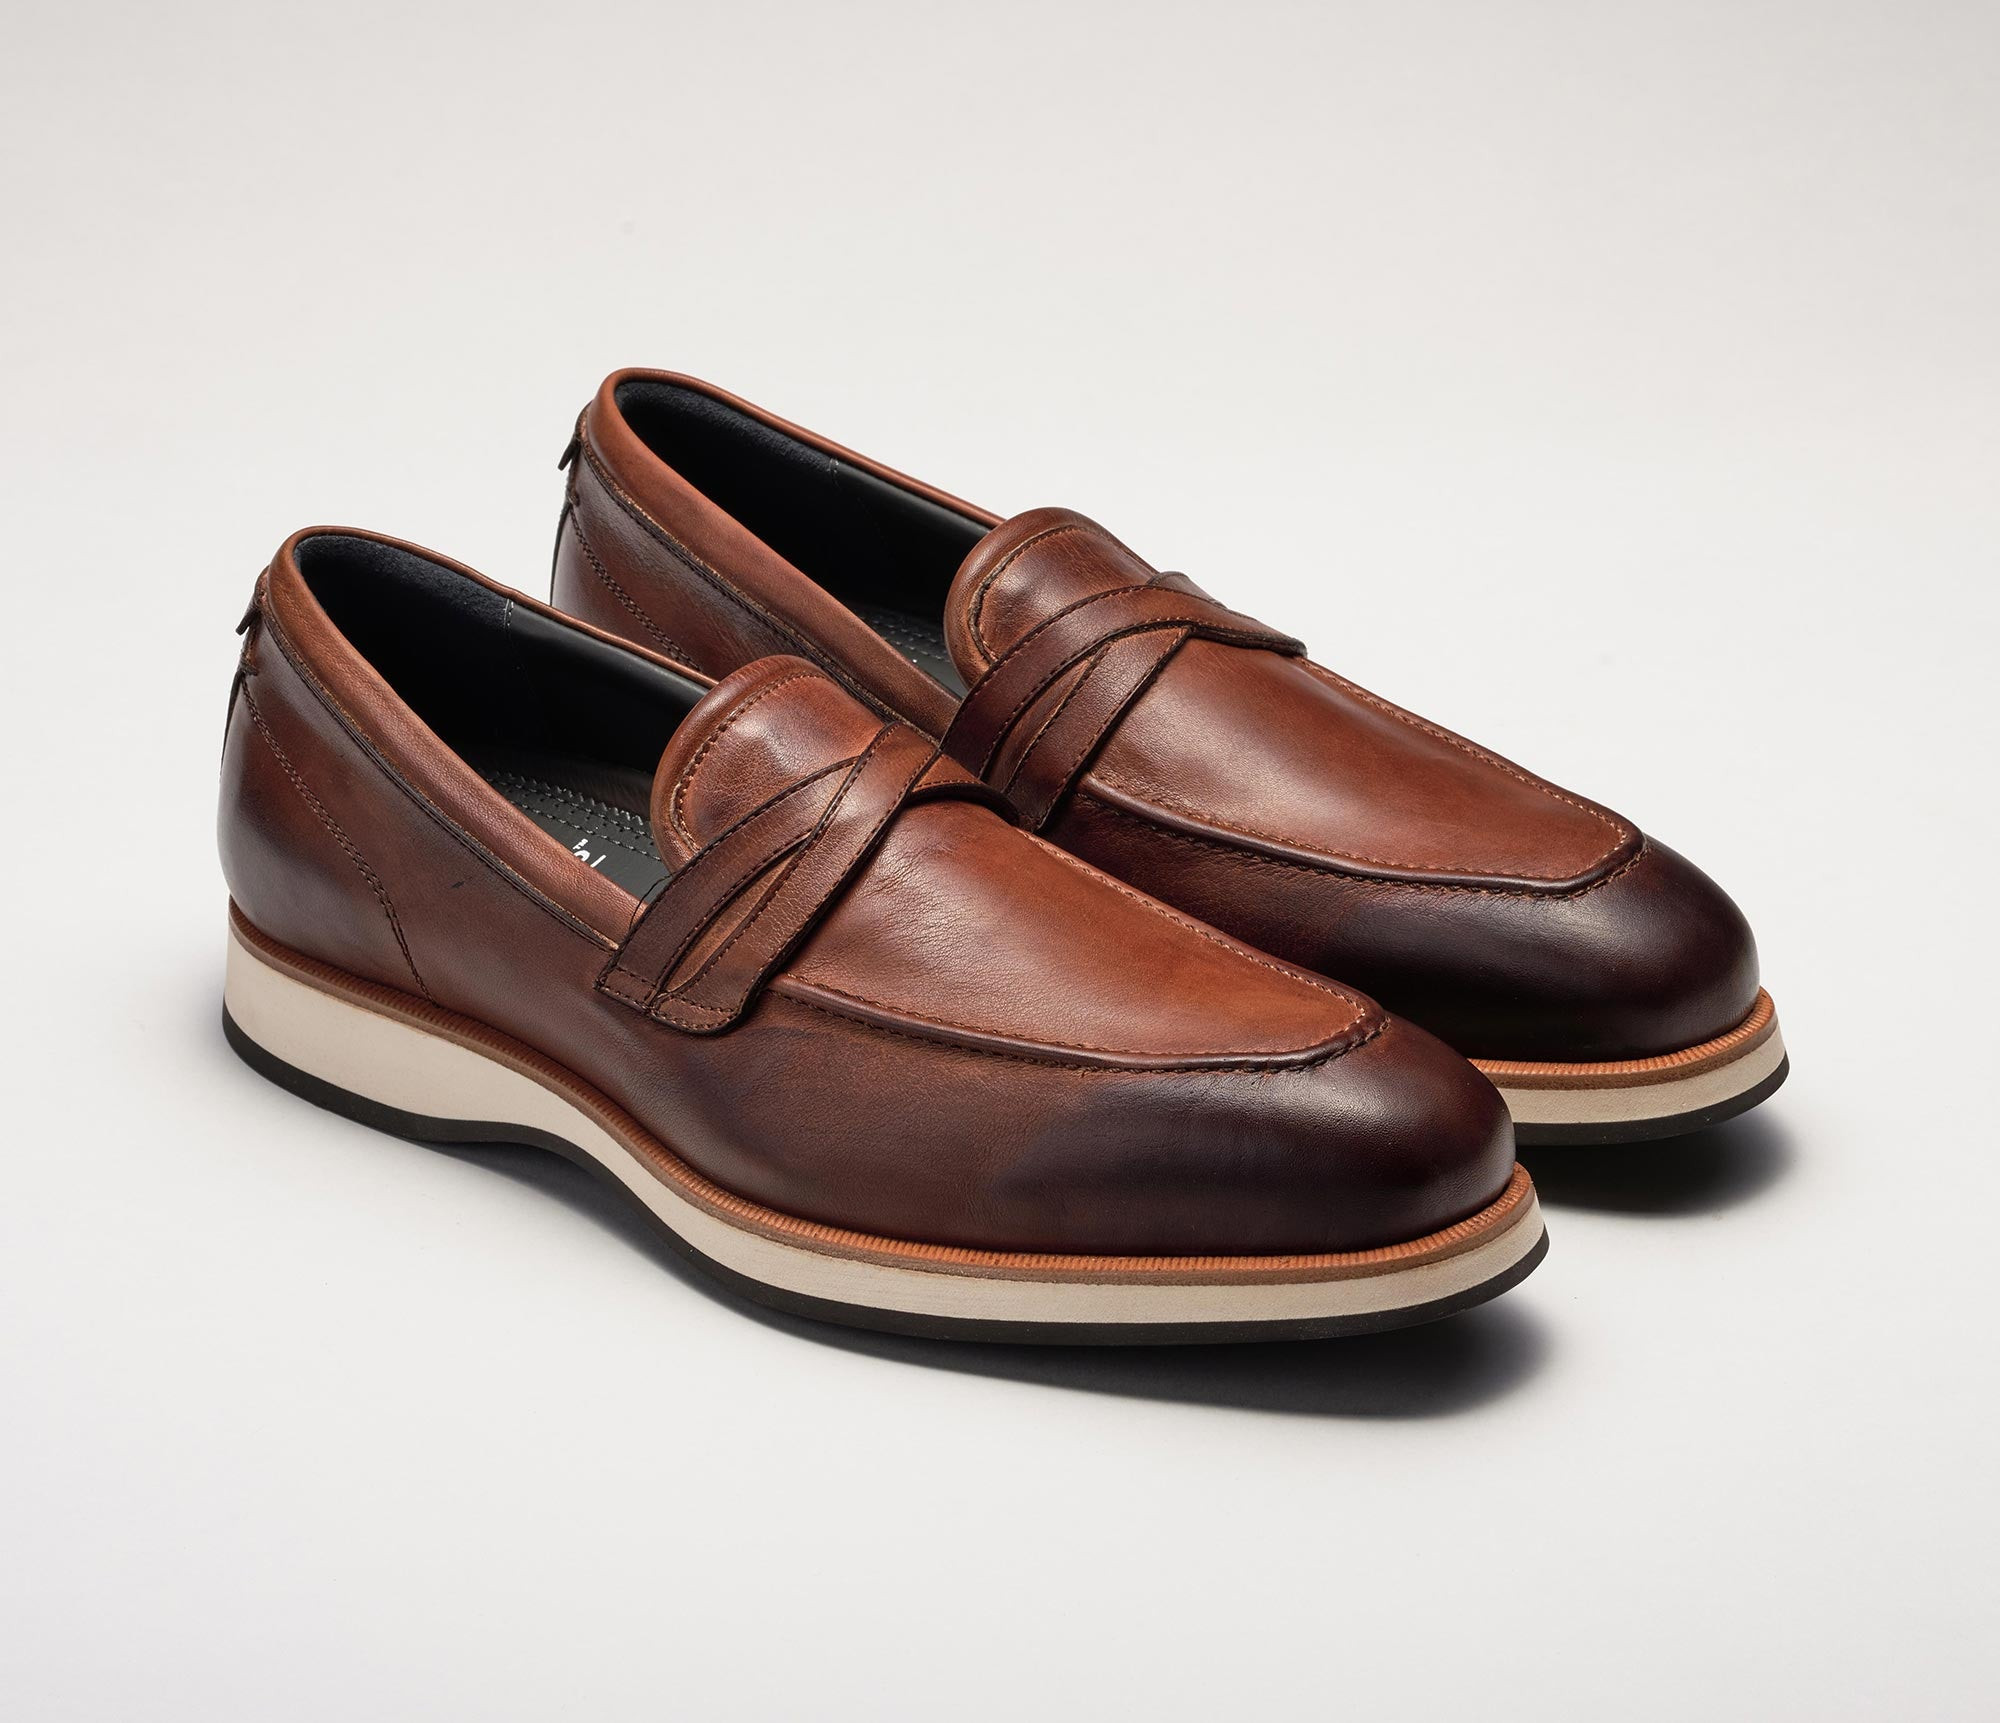 Firenze Loafer with Rubber Sole Loafer